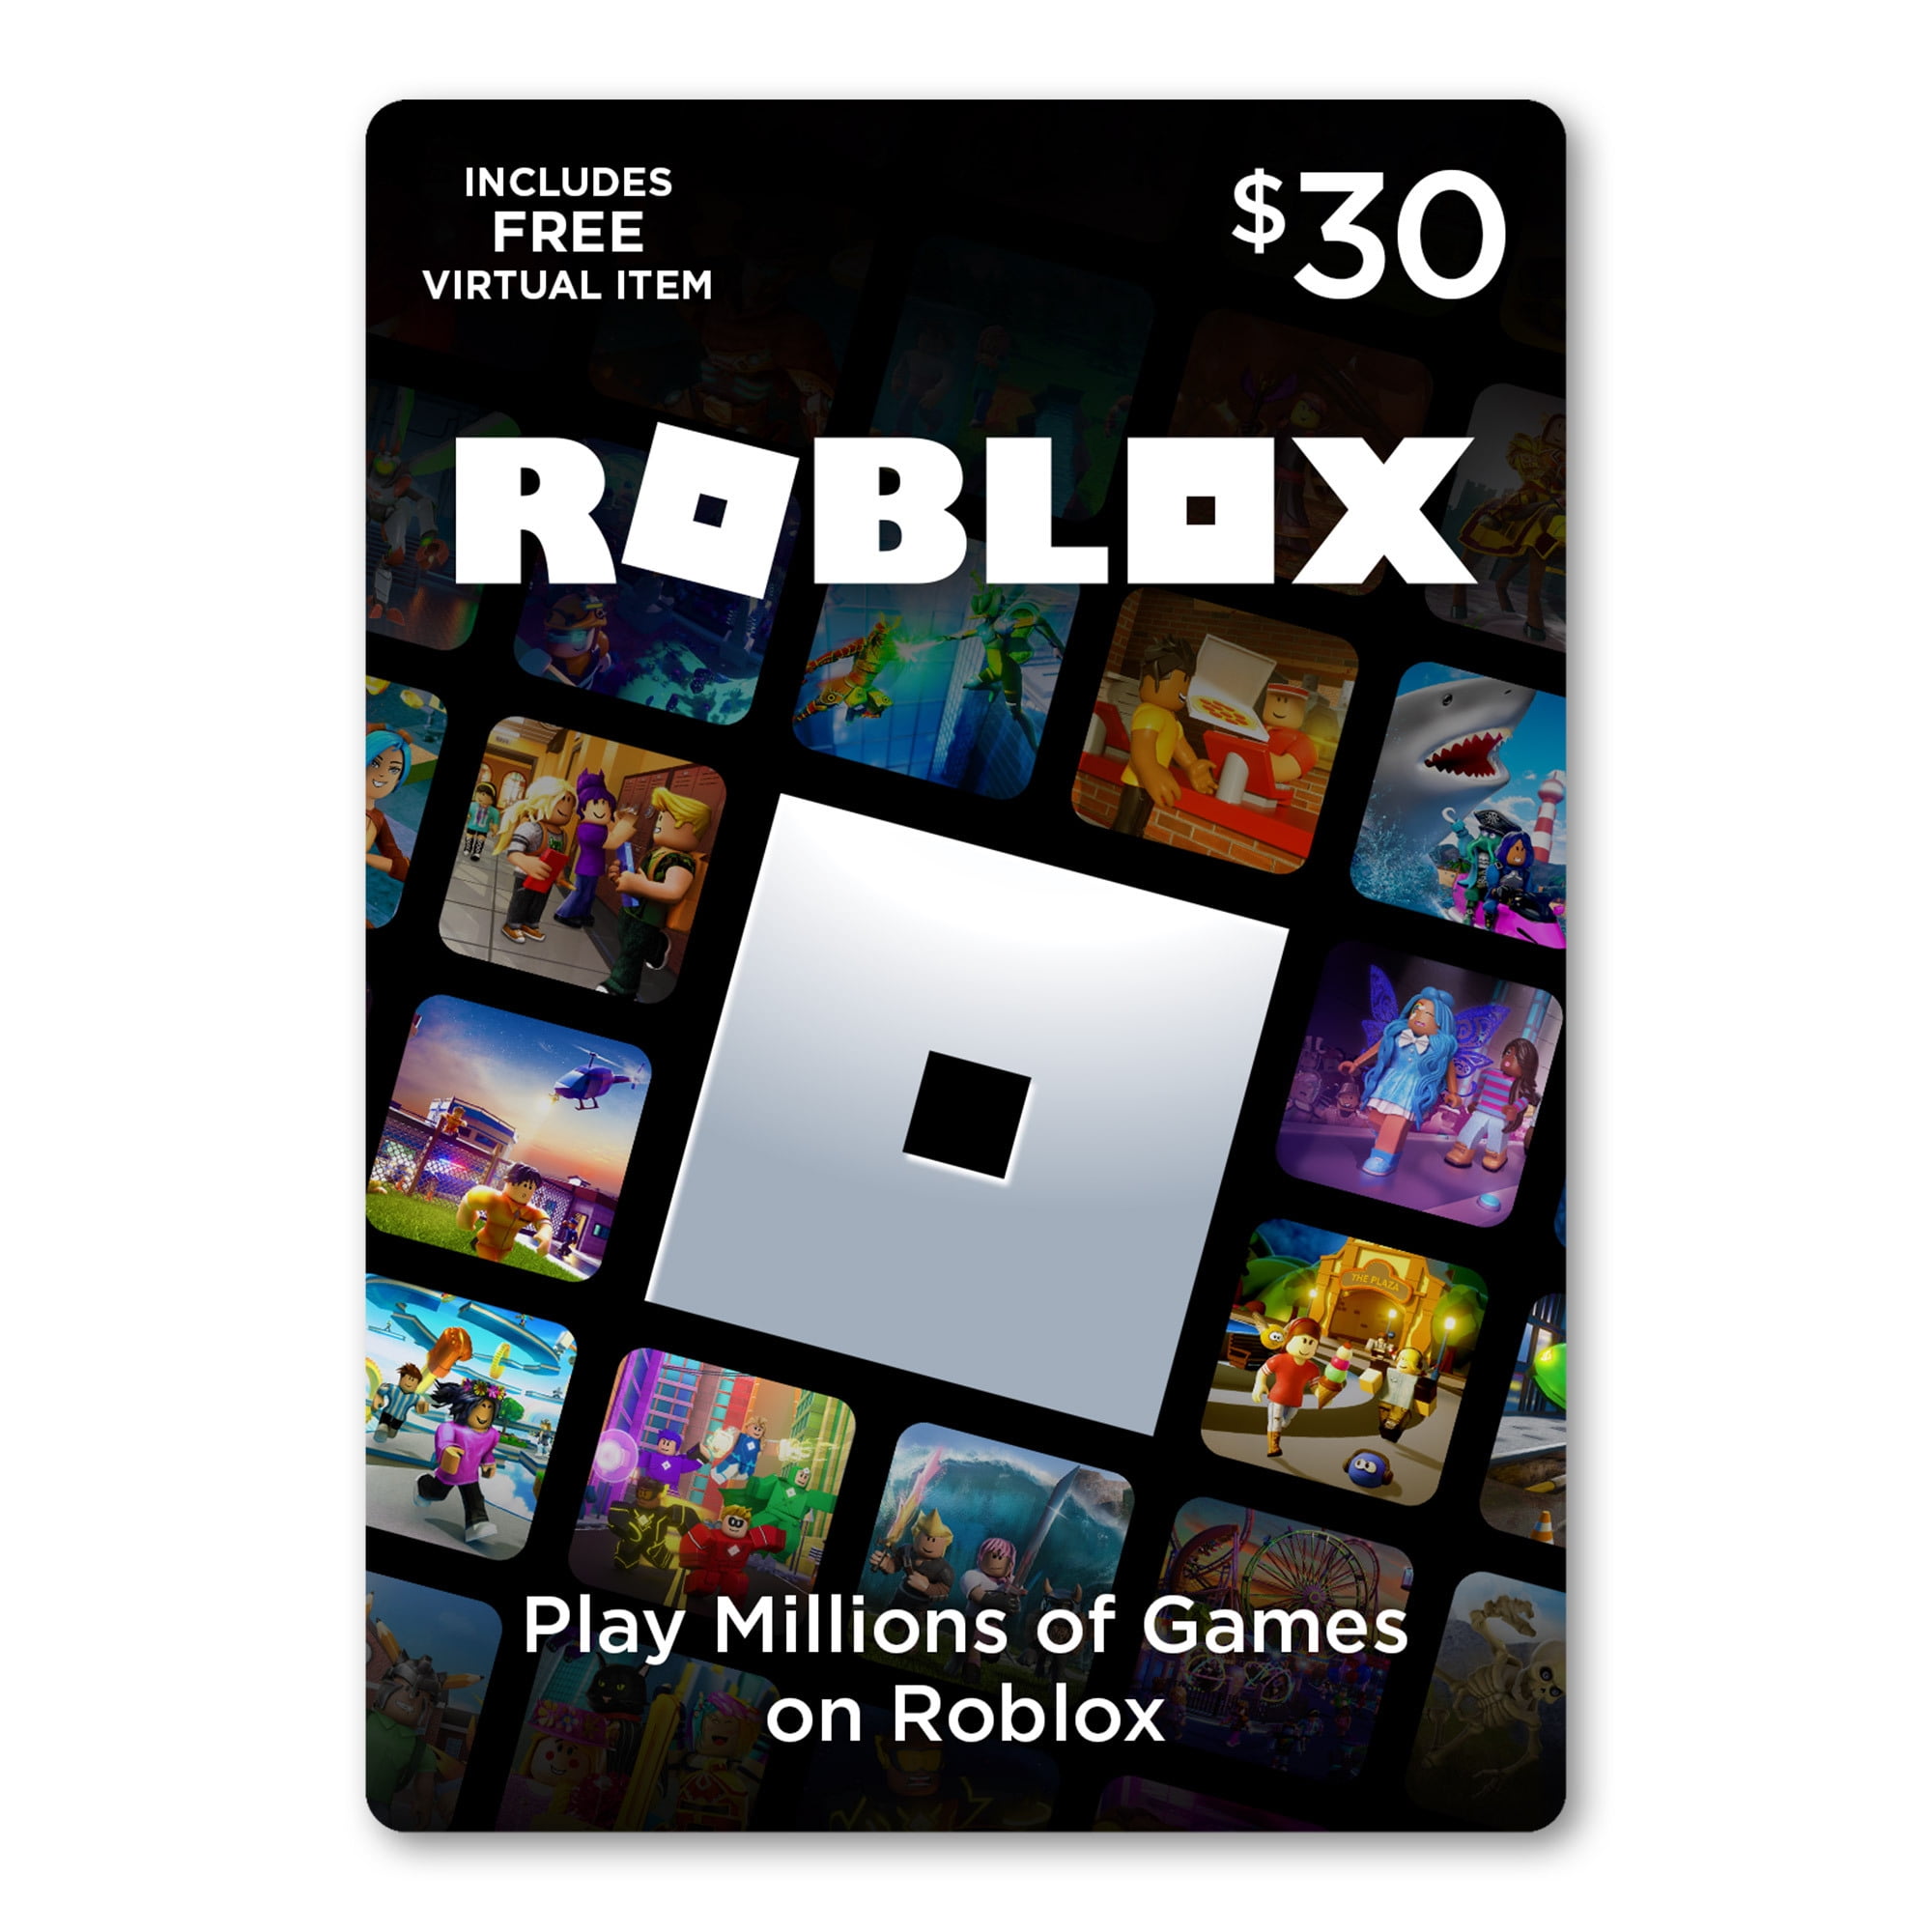 Roblox 30 Digital Gift Card Includes Exclusive Virtual Item Digital Download Walmart Com Walmart Com - how much robux can i get out of 30 dollars